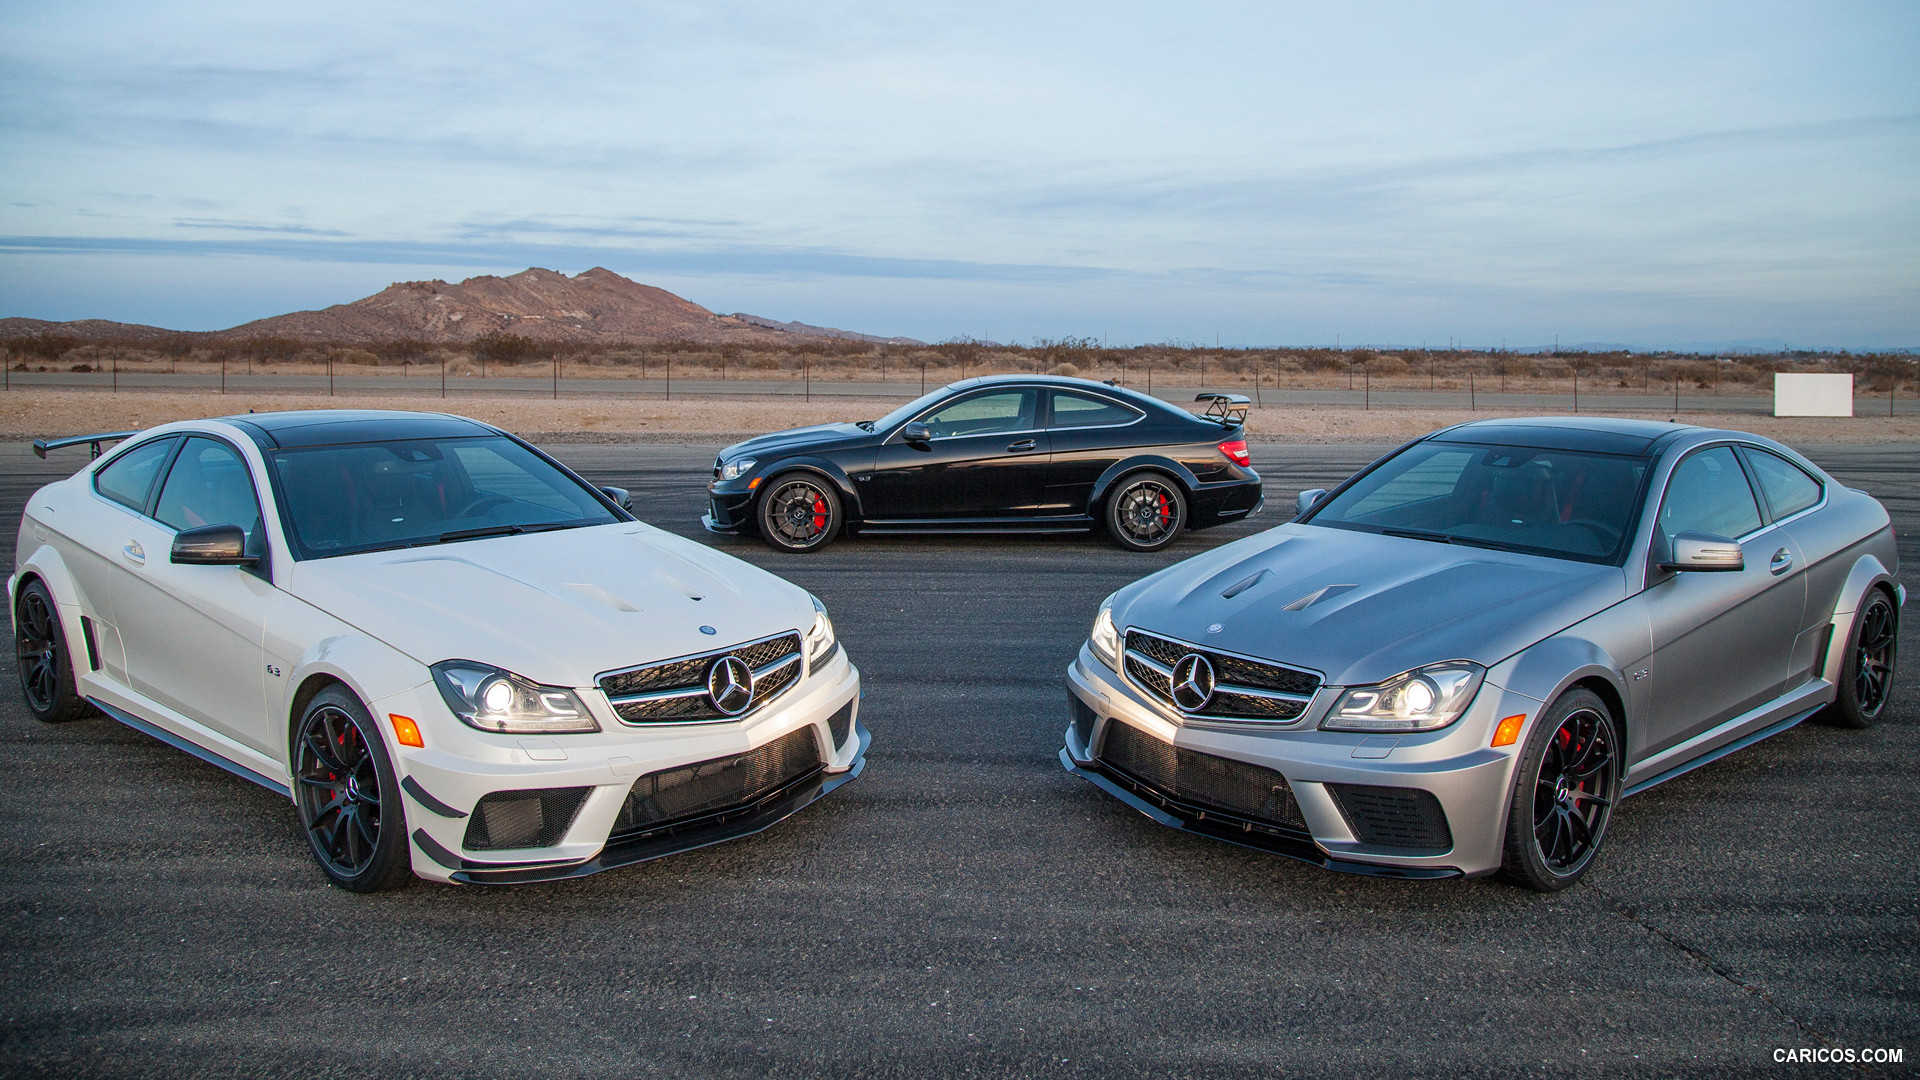 2012 Mercedes-Benz C63 AMG Coupe Black Series Trio - Front, #44 of 136